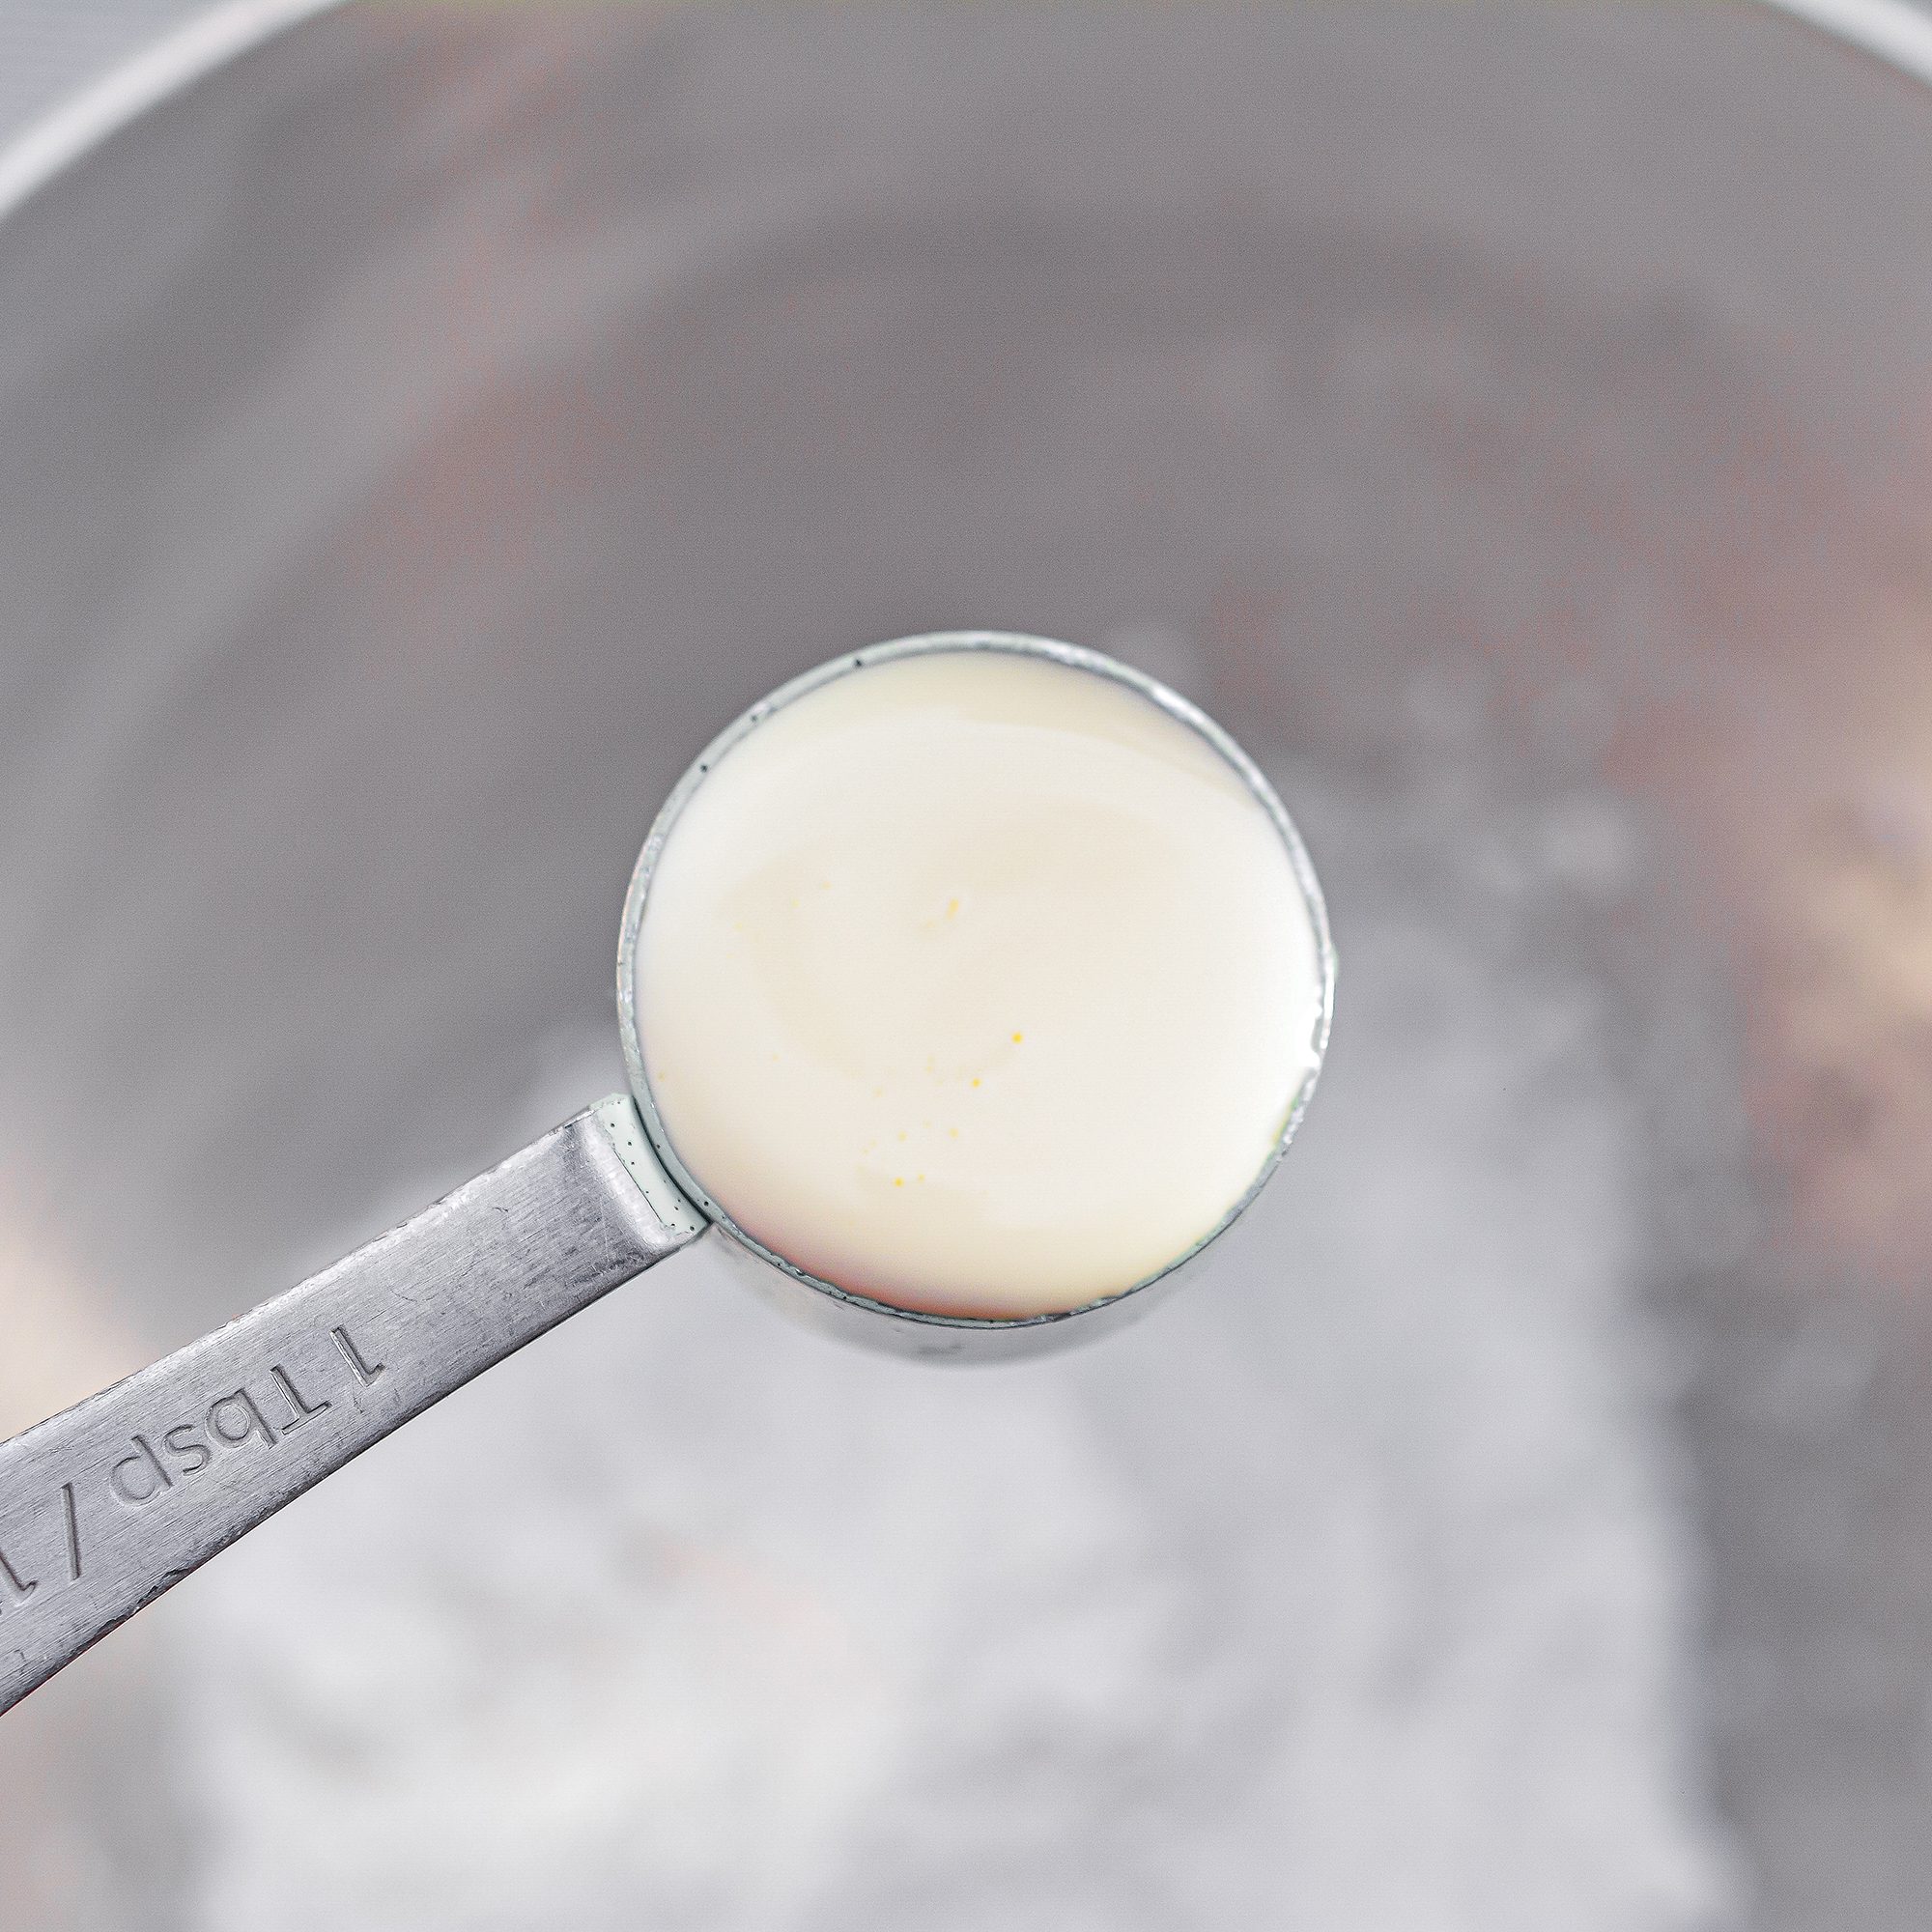 In a bowl, whisk together the powdered sugar, heavy whipping cream as needed, and the vanilla extract for the drizzle.